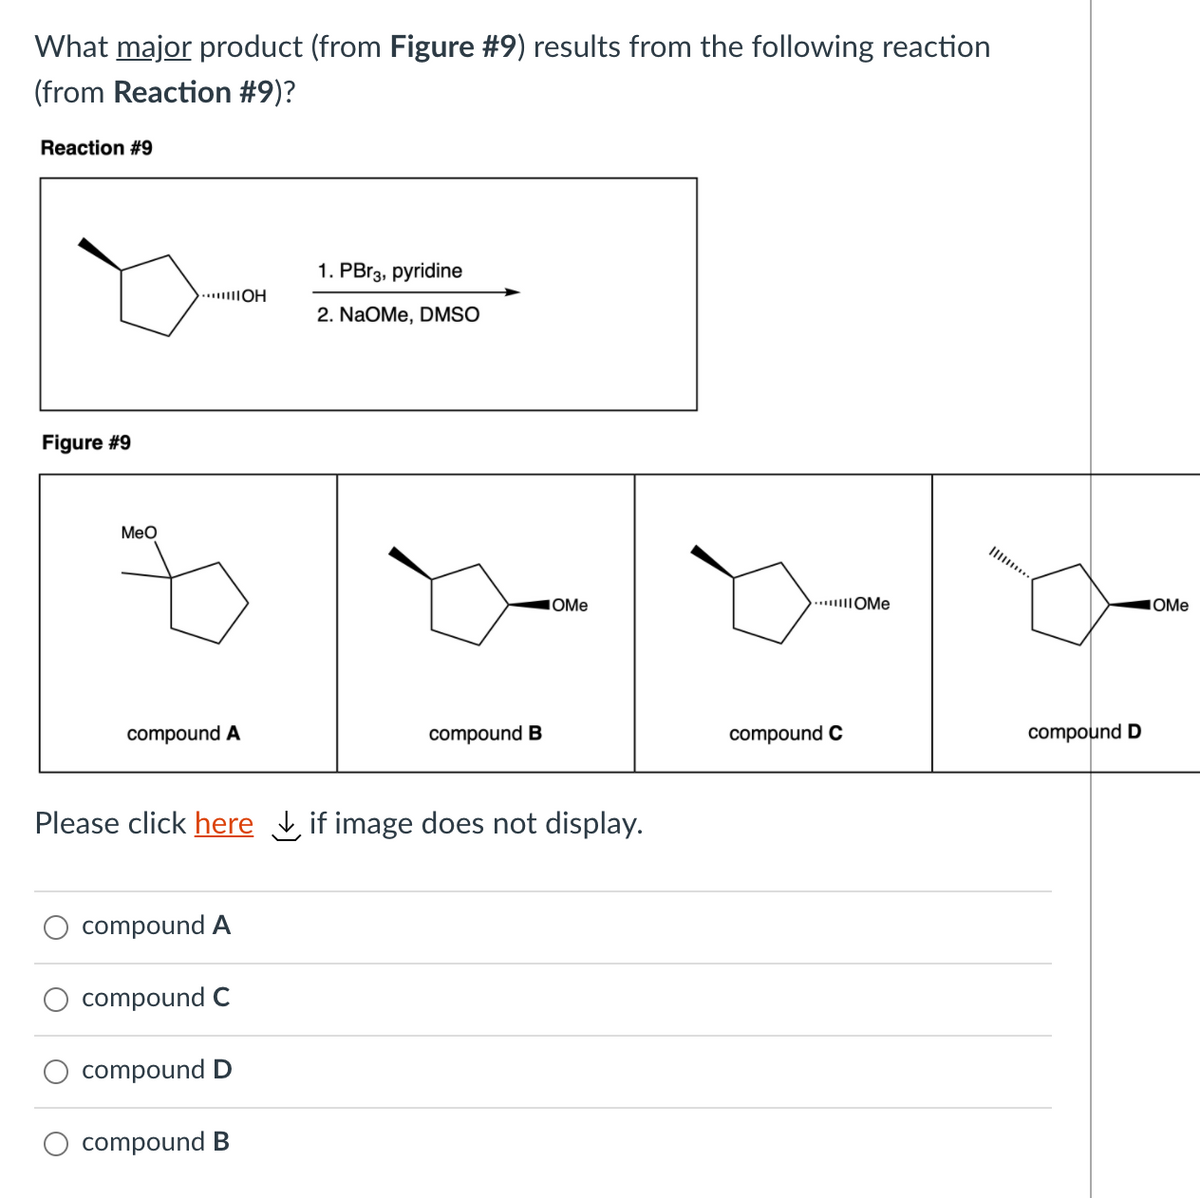 What major product (from Figure #9) results from the following reaction
(from Reaction #9)?
Reaction #9
1. PBr3, pyridine
....OH
2. NaOMe, DMSO
Figure #9
Meo
II
OMe
.....|OMe
IOME
compound A
compound B
compound C
compound D
Please click here Lif image does not display.
compound A
compound C
compound D
compound B
